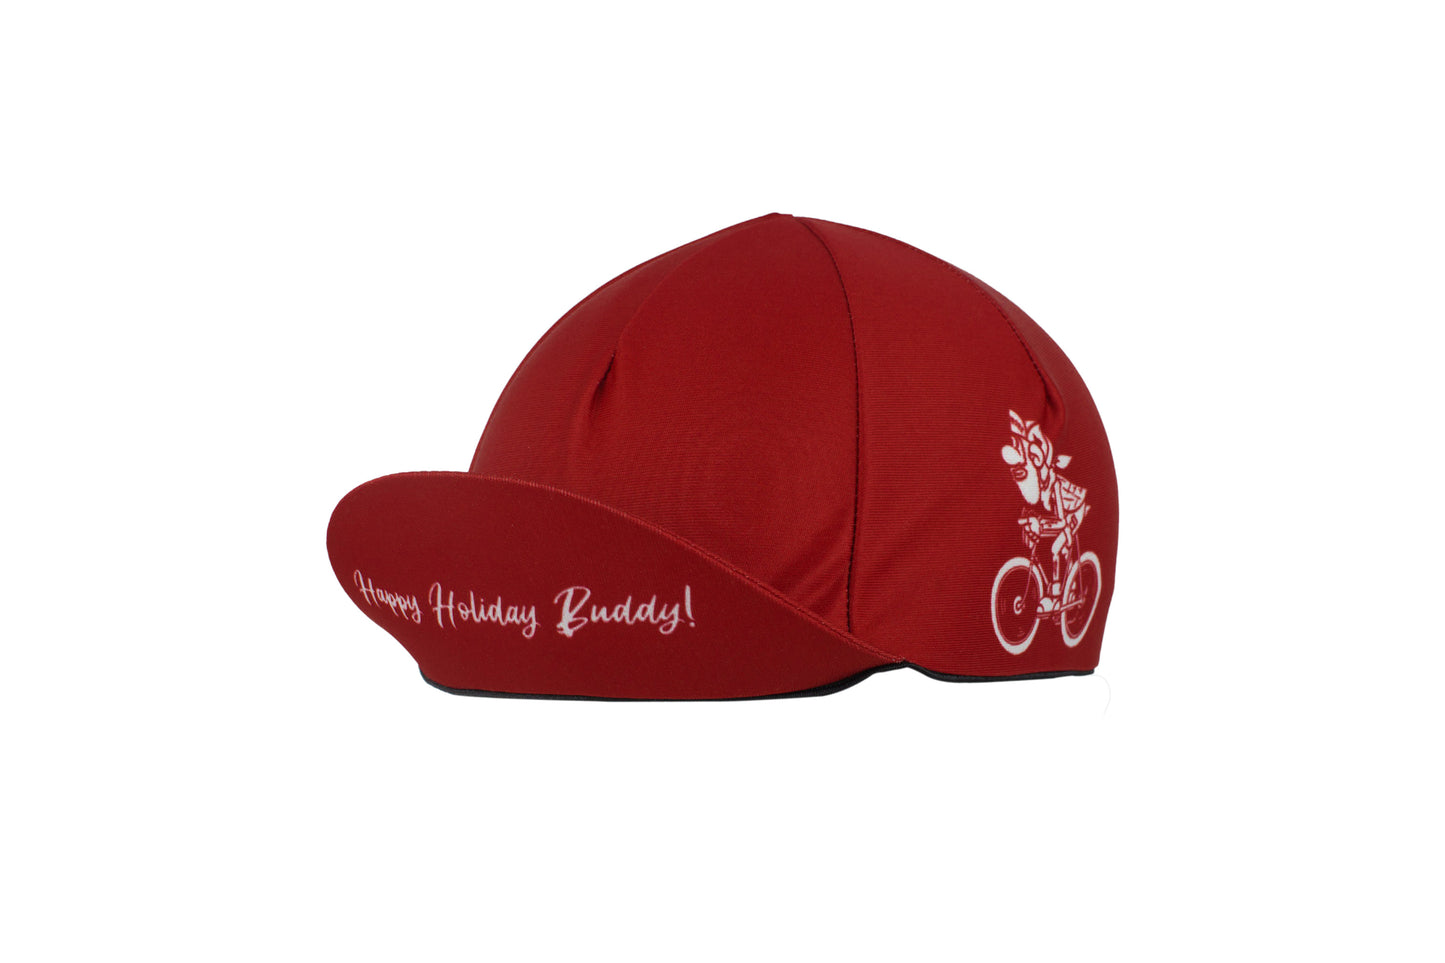 Thy Origins x GW Holiday exclusive 4-Panel Cycling cap (Maroon)